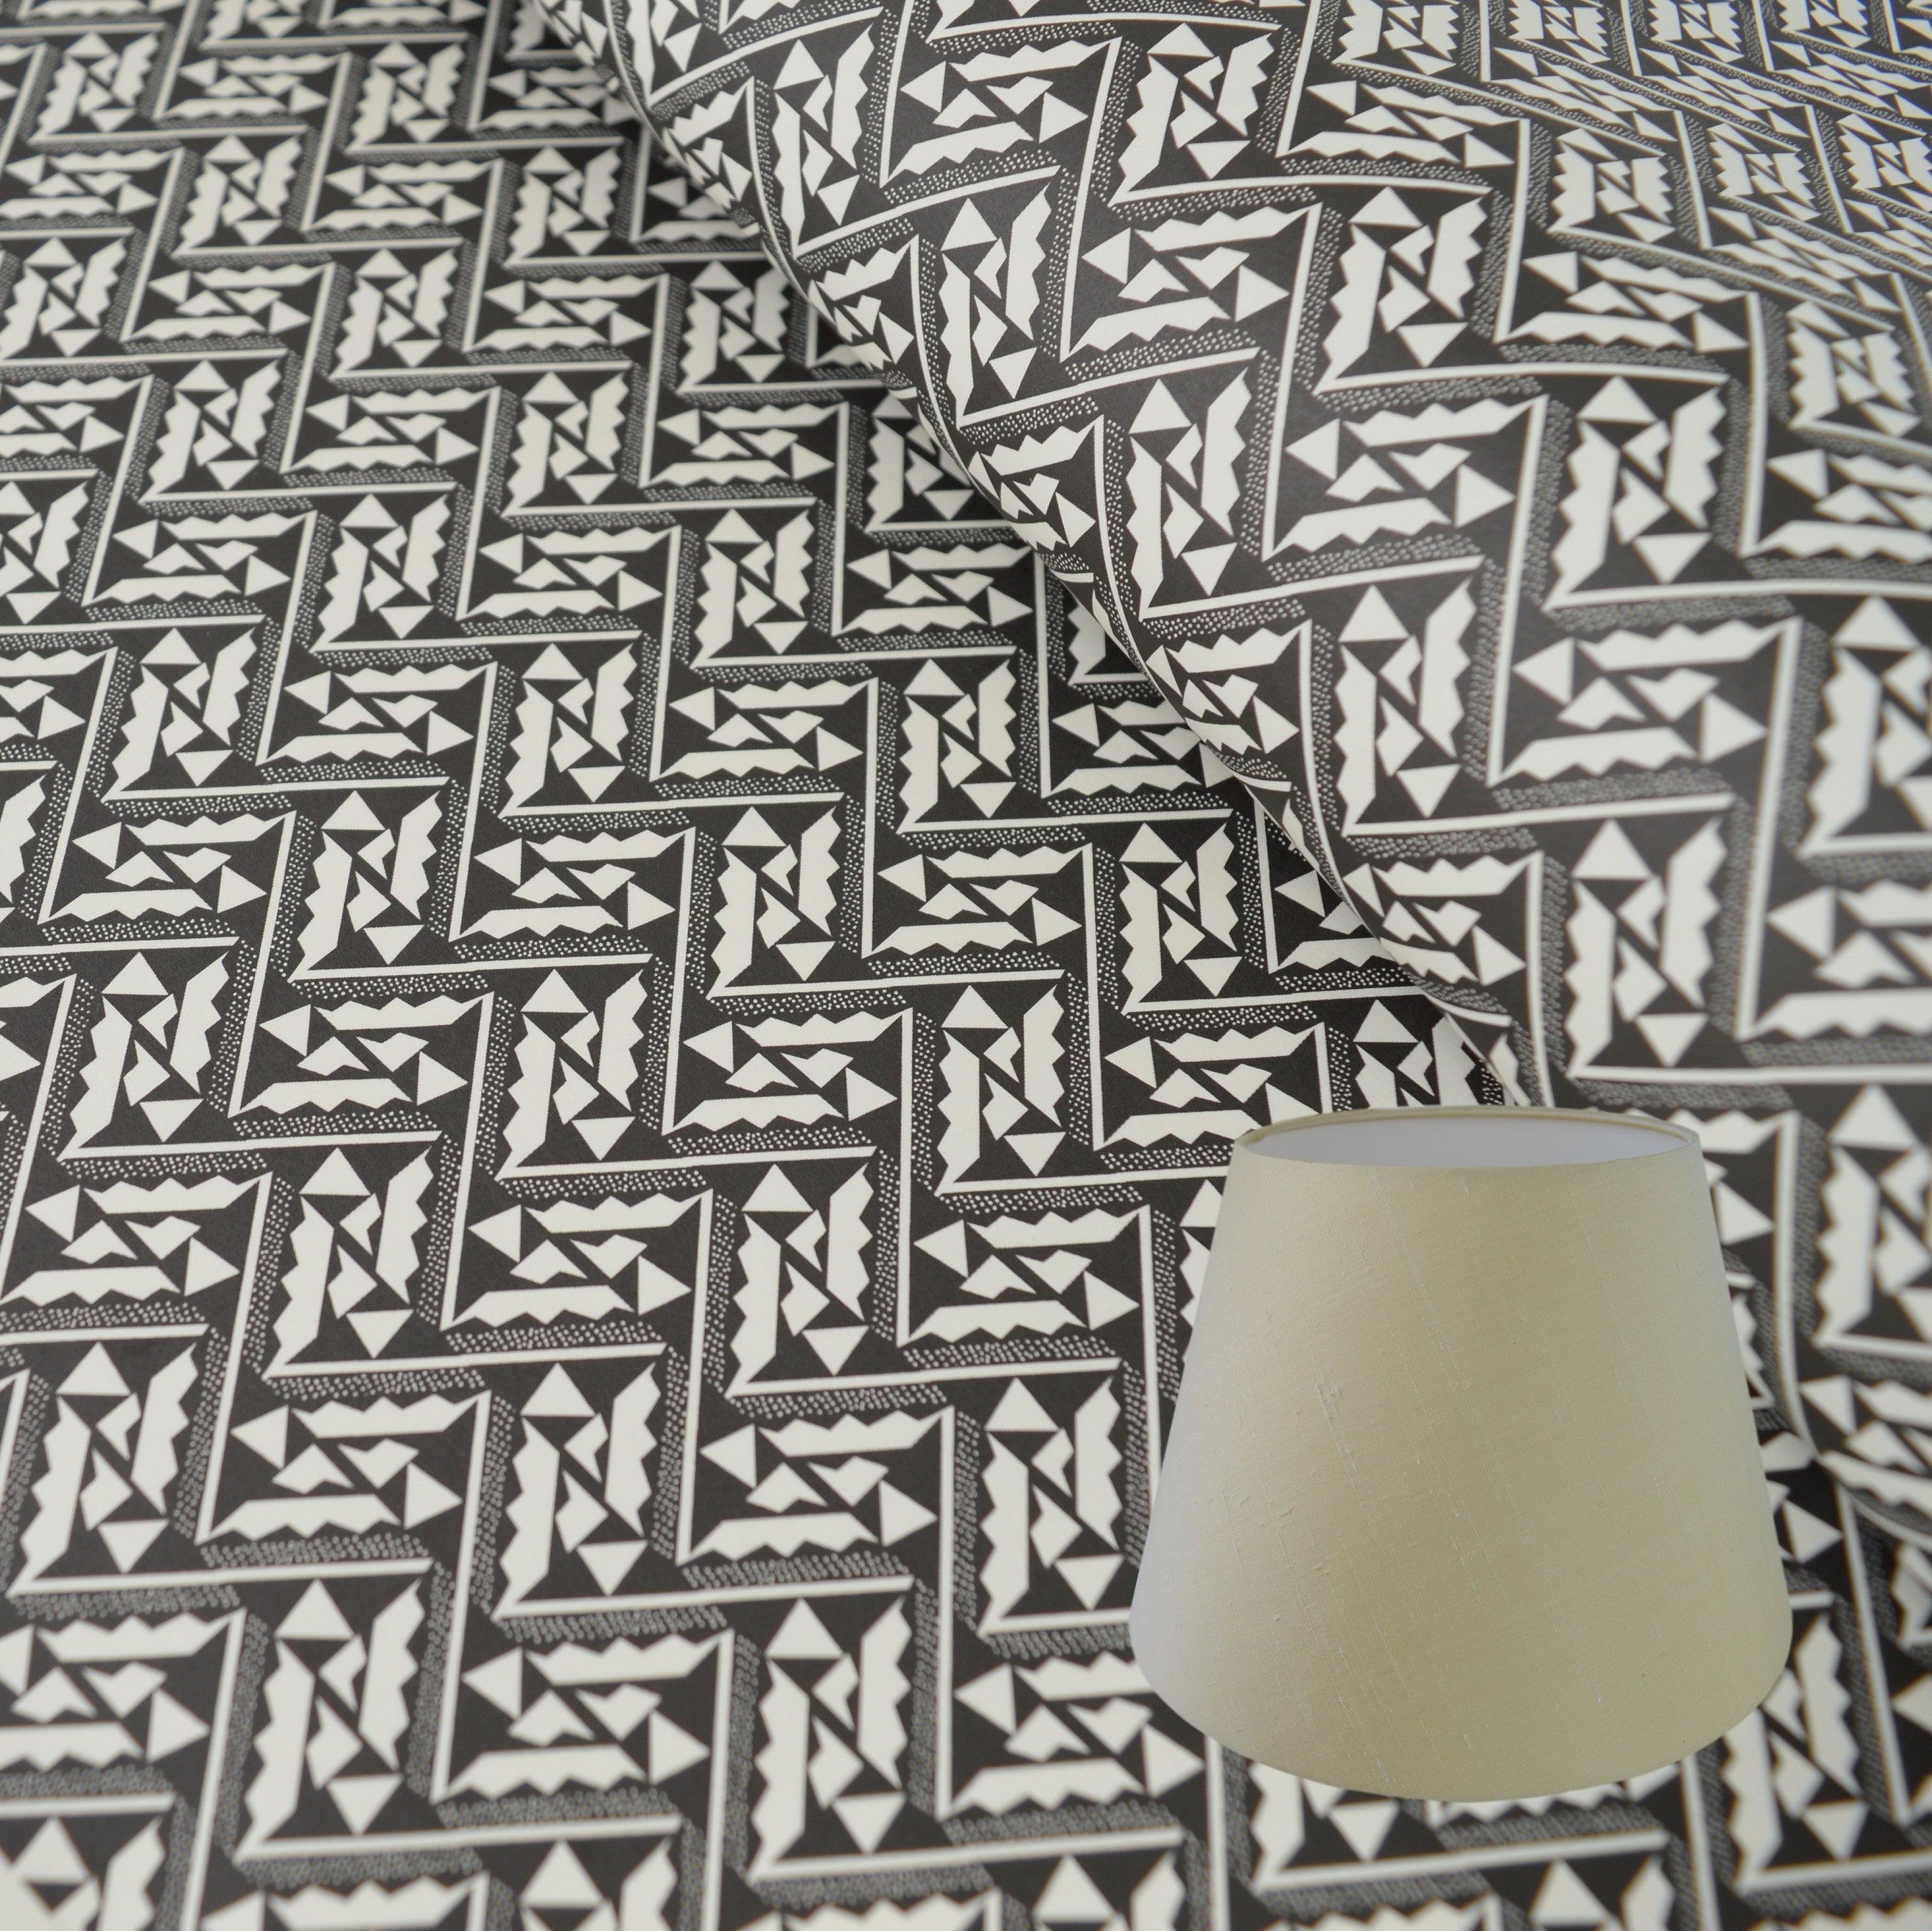 Munro and Kerr black and white monochrome printed Esme Winter paper for a lampshade